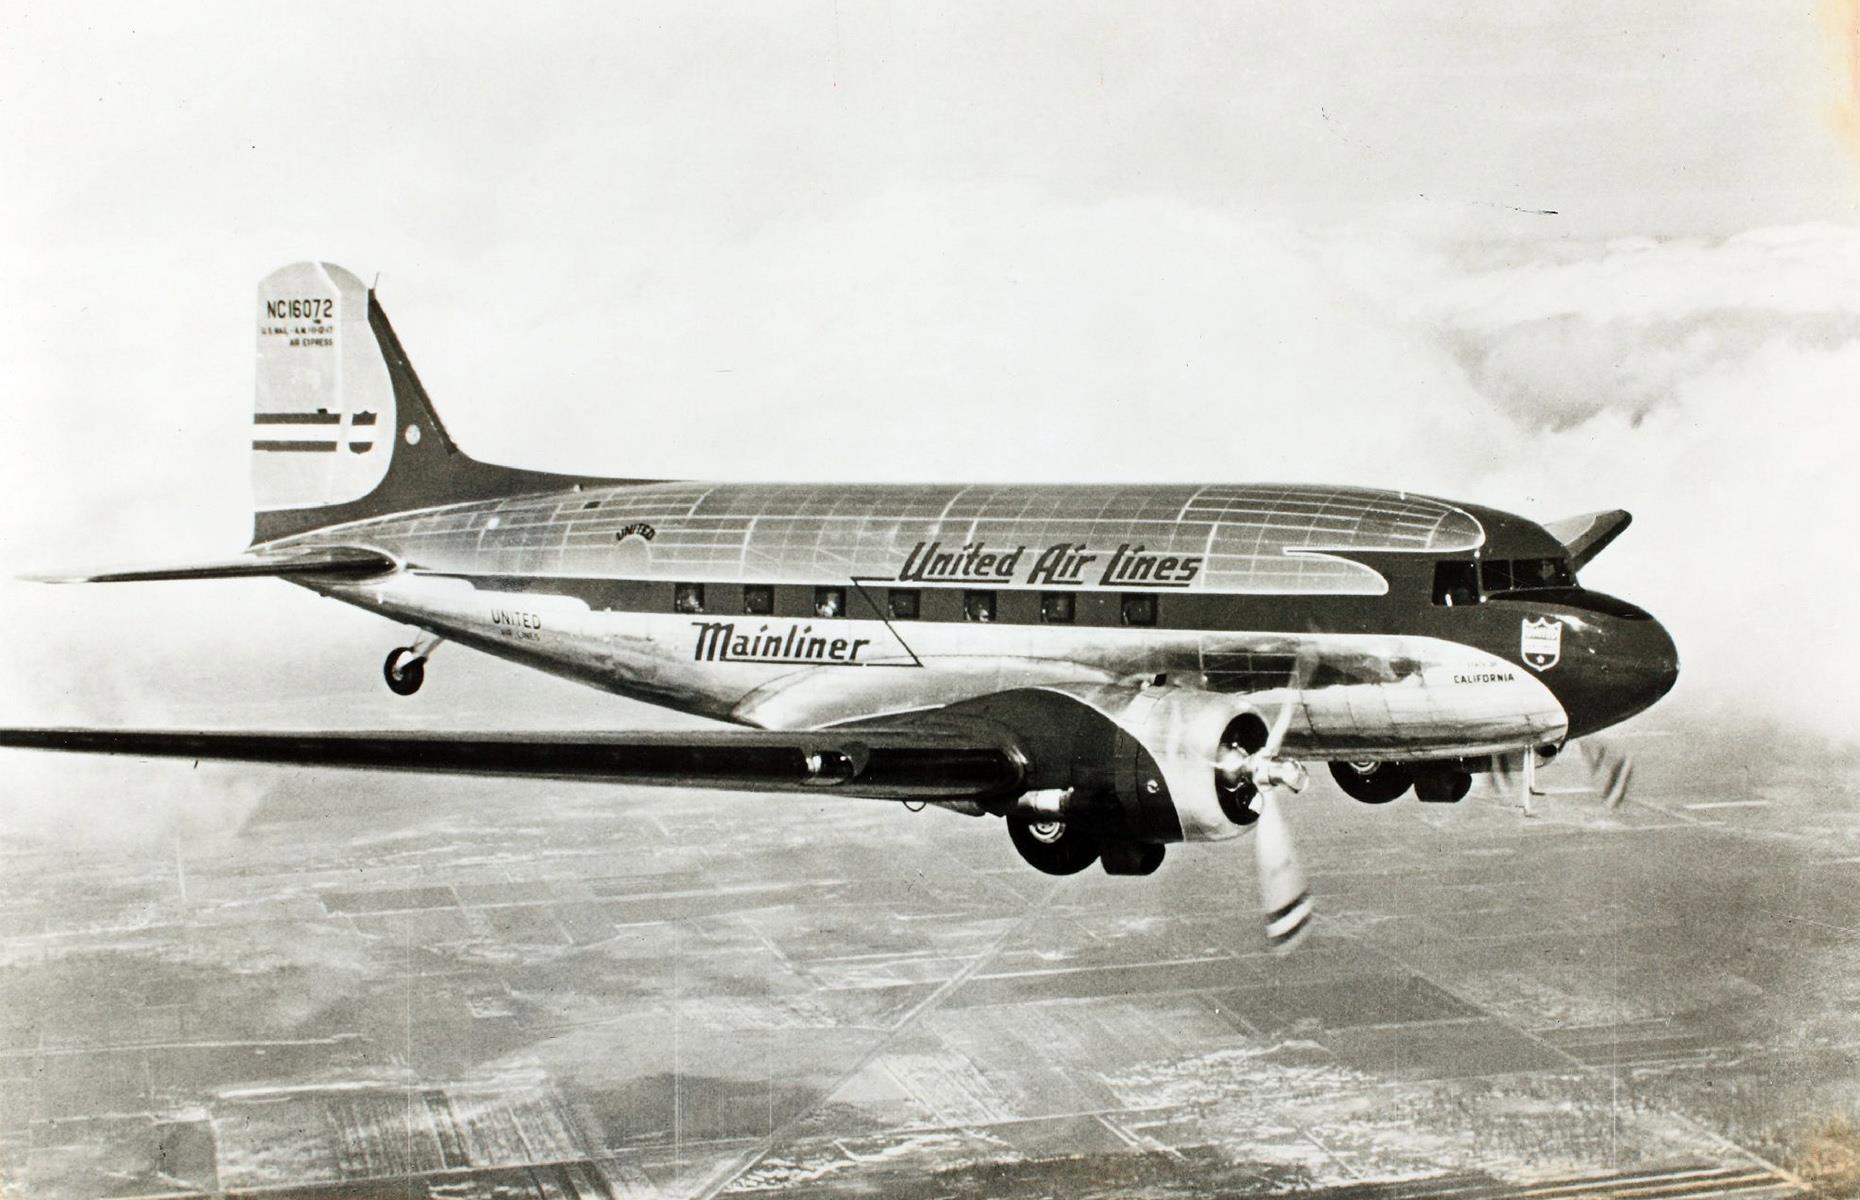 One 1930s invention would seriously revolutionize commercial air travel. The Douglas DC-3 had its first flight in 1935 and raised the bar when it came to commercial airliners. It was larger, faster and more comfortable than any model that had preceded it and it was soon snapped up by industry heavyweights such as Delta, TWA, American and United. A United Douglas DC-3 aircraft is pictured here cruising through the air.